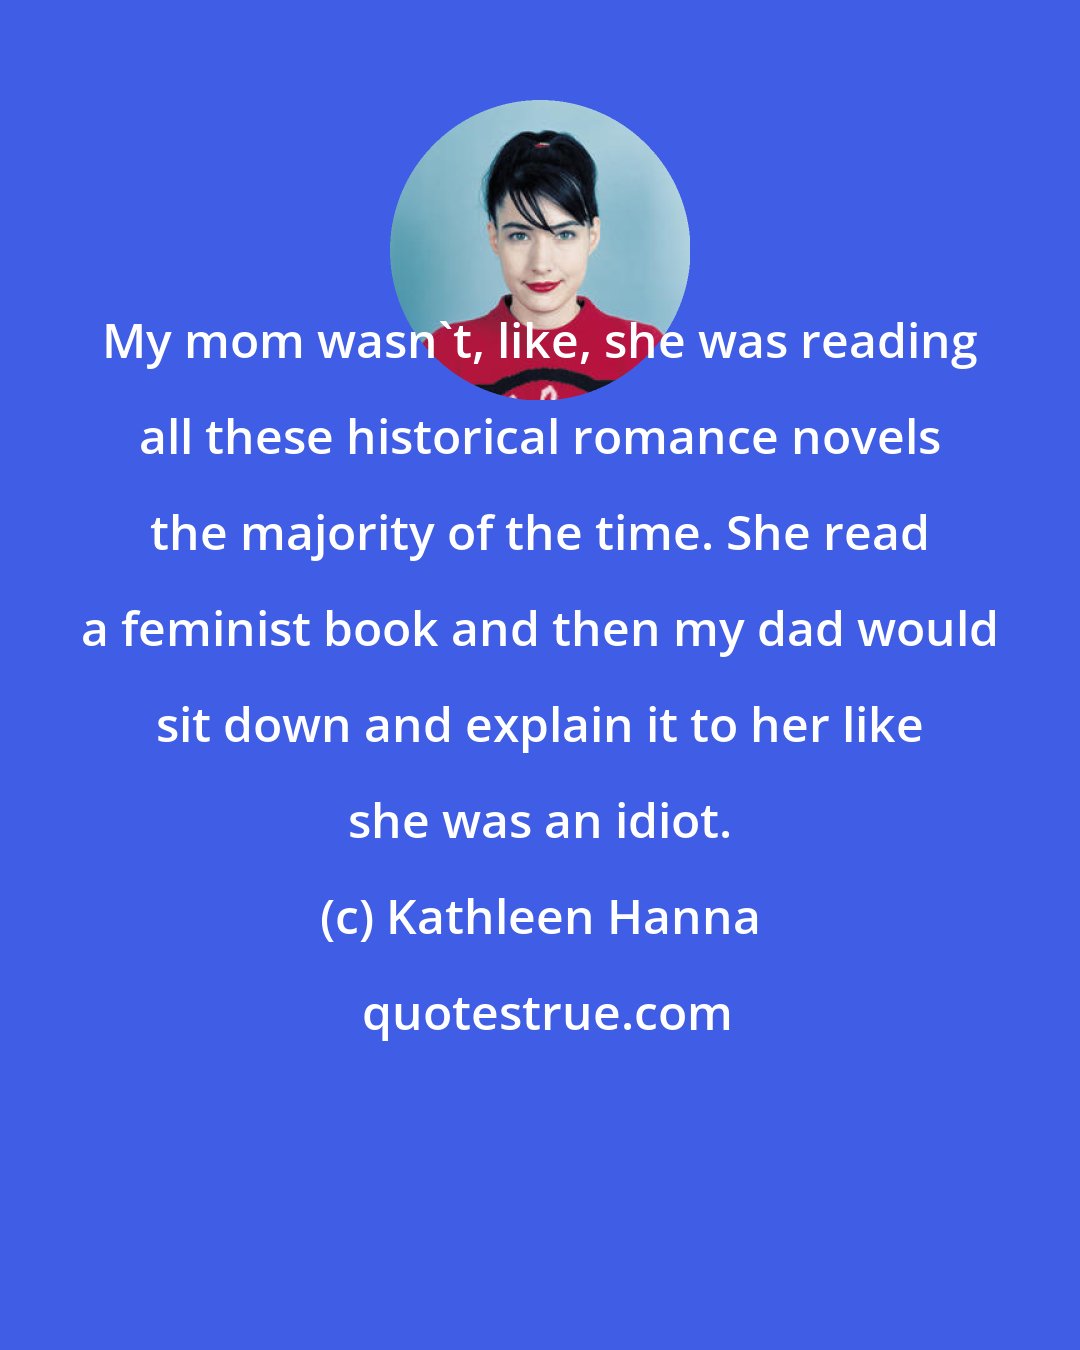 Kathleen Hanna: My mom wasn't, like, she was reading all these historical romance novels the majority of the time. She read a feminist book and then my dad would sit down and explain it to her like she was an idiot.